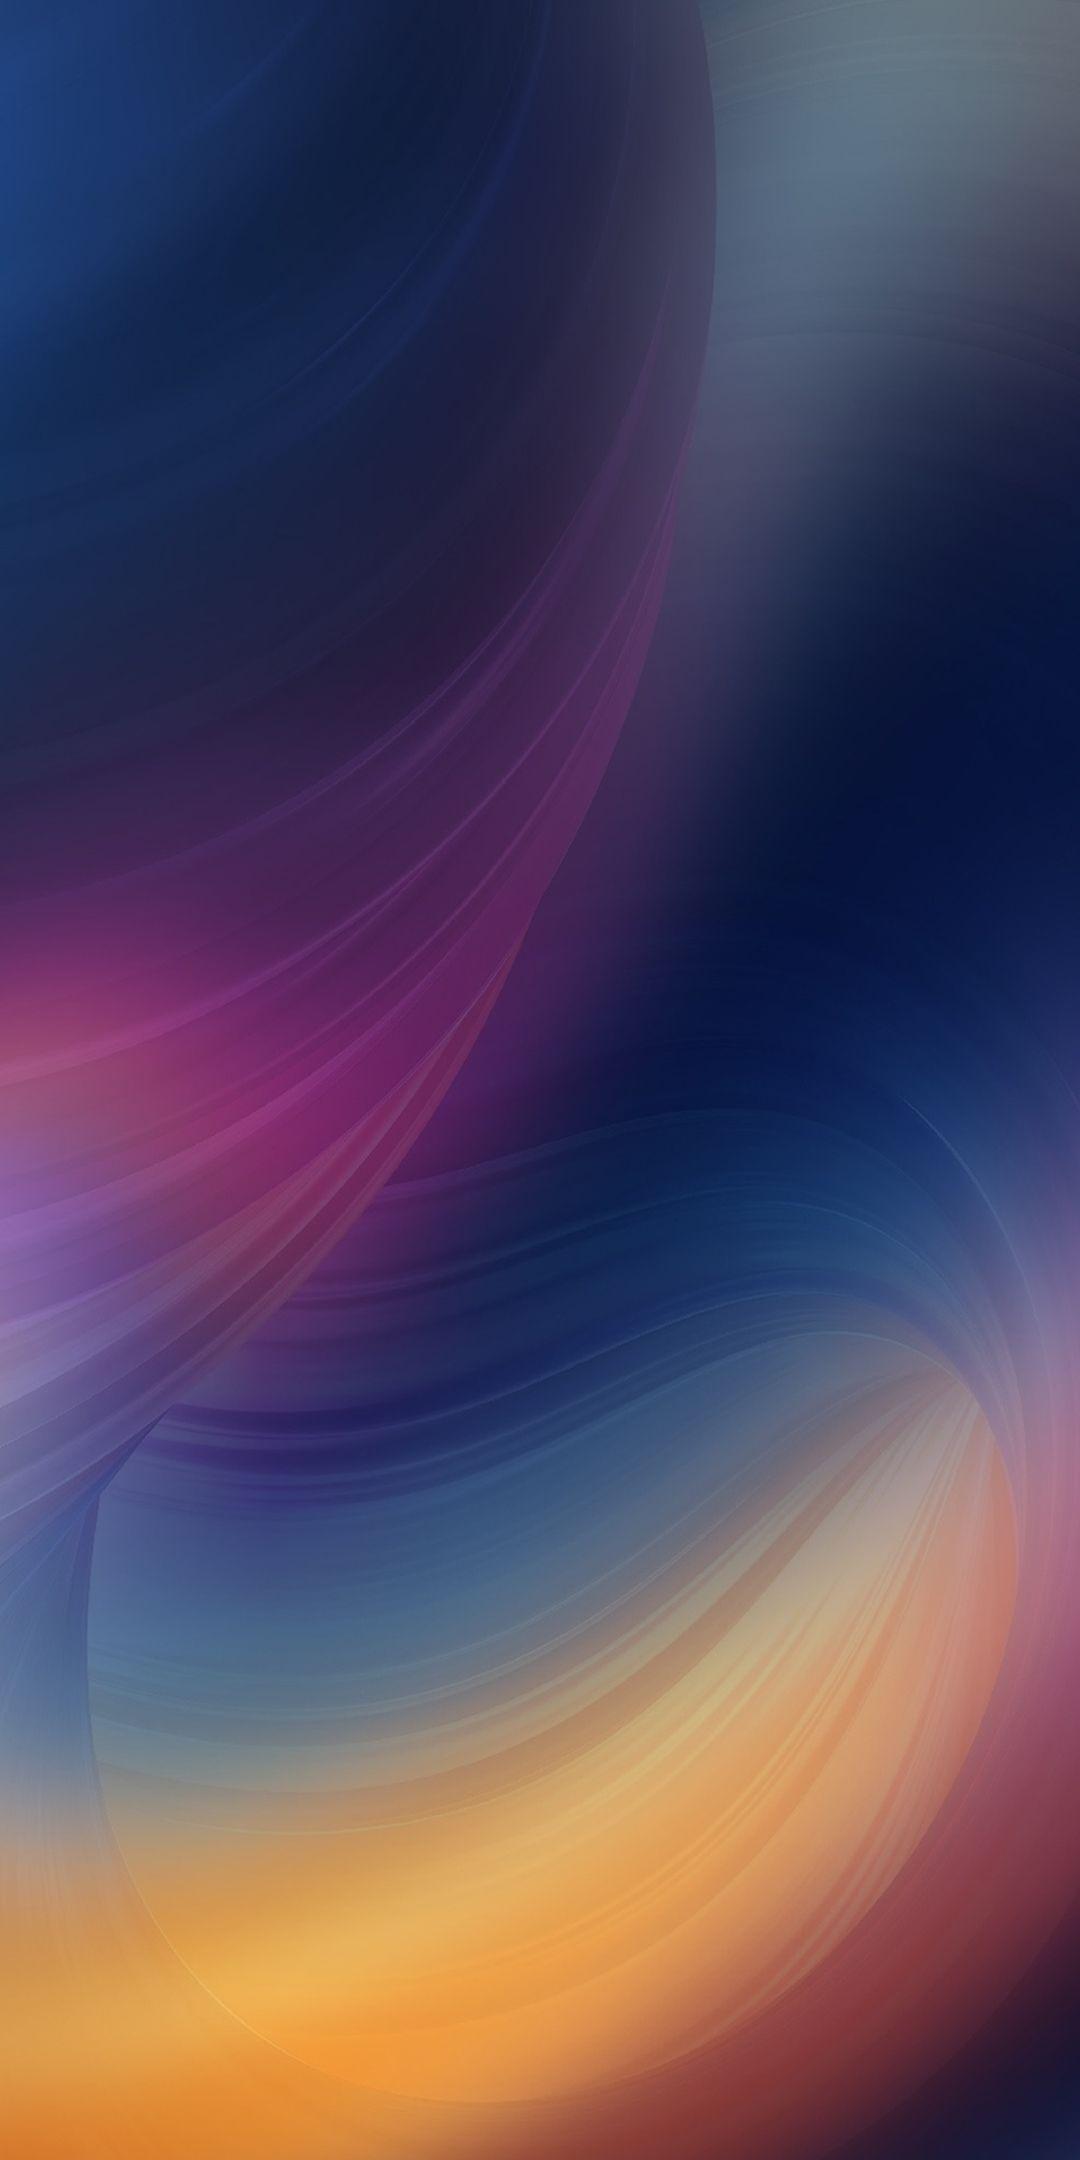 Huawei Mate Pro Wallpapers of with Abstract Light